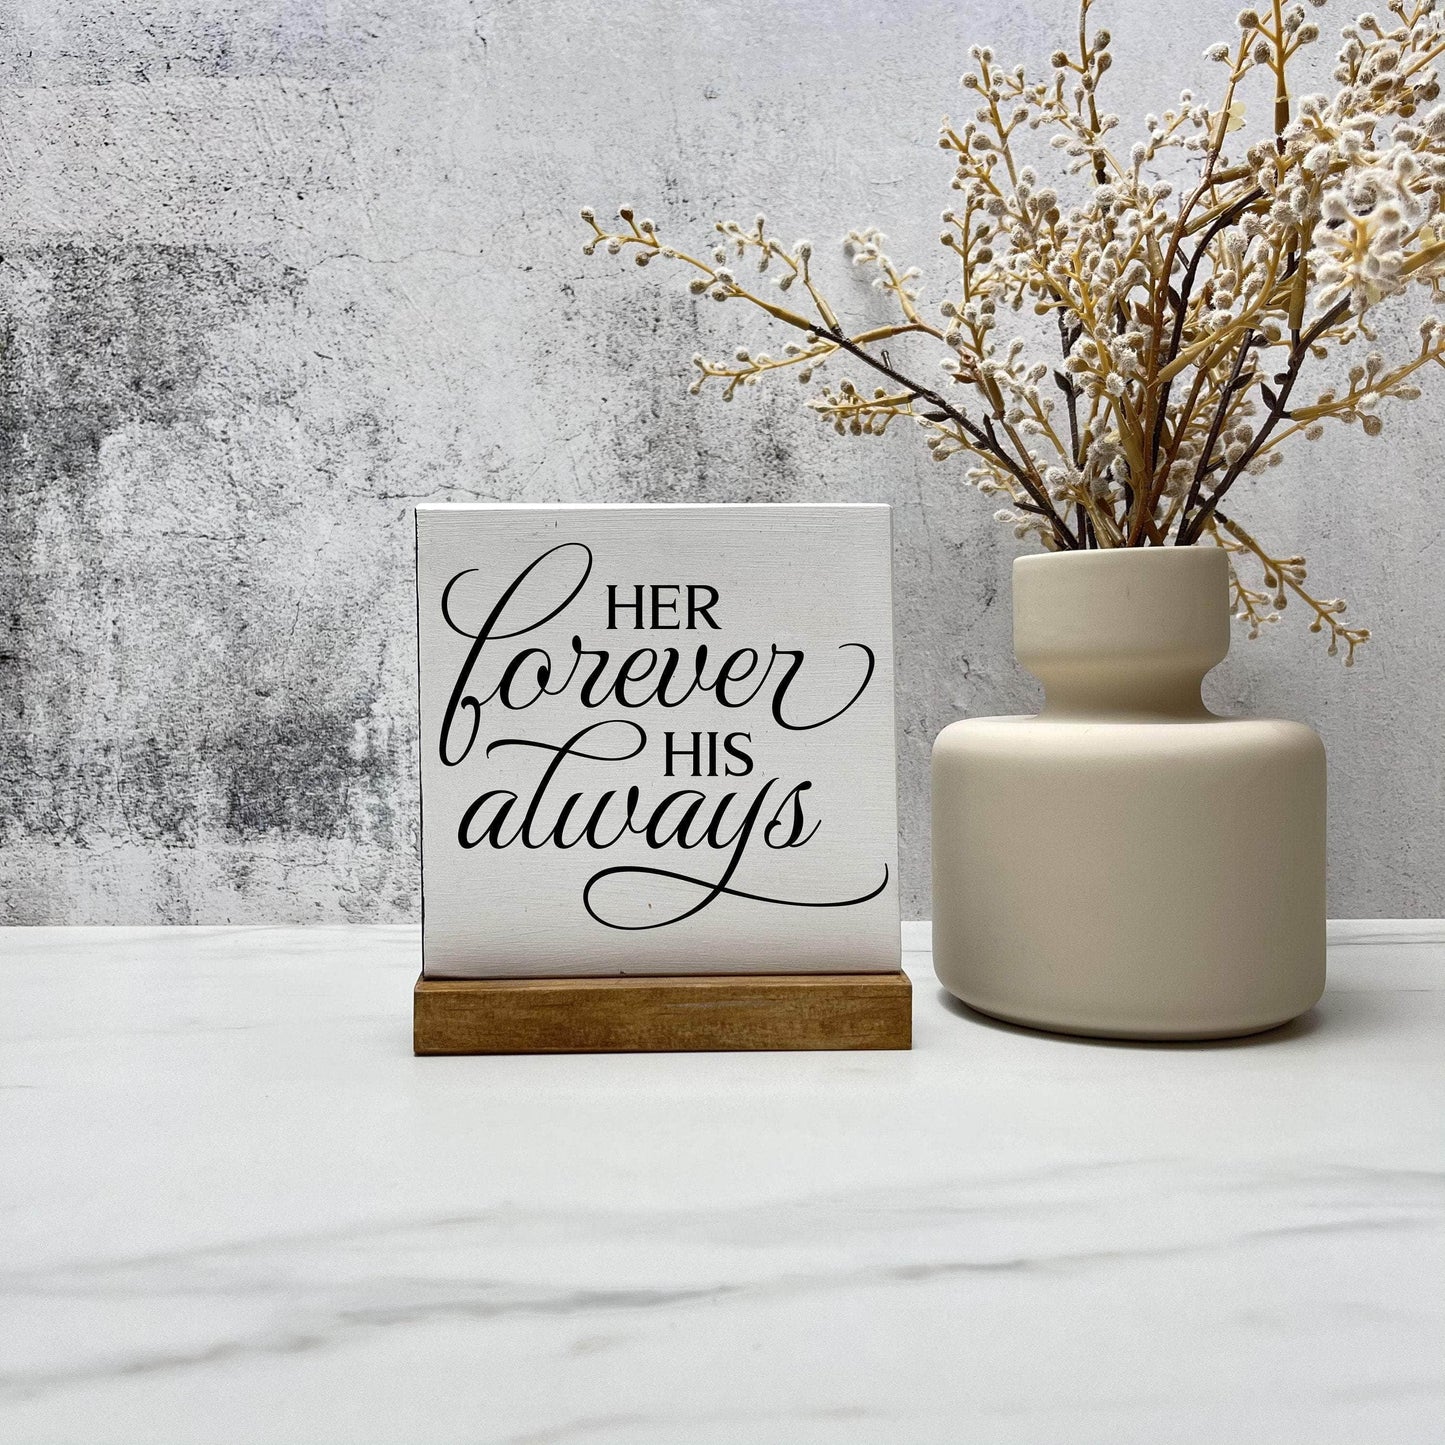 Her forever, his always wood sign, love sign, couples gift sign, quote sign, home decor